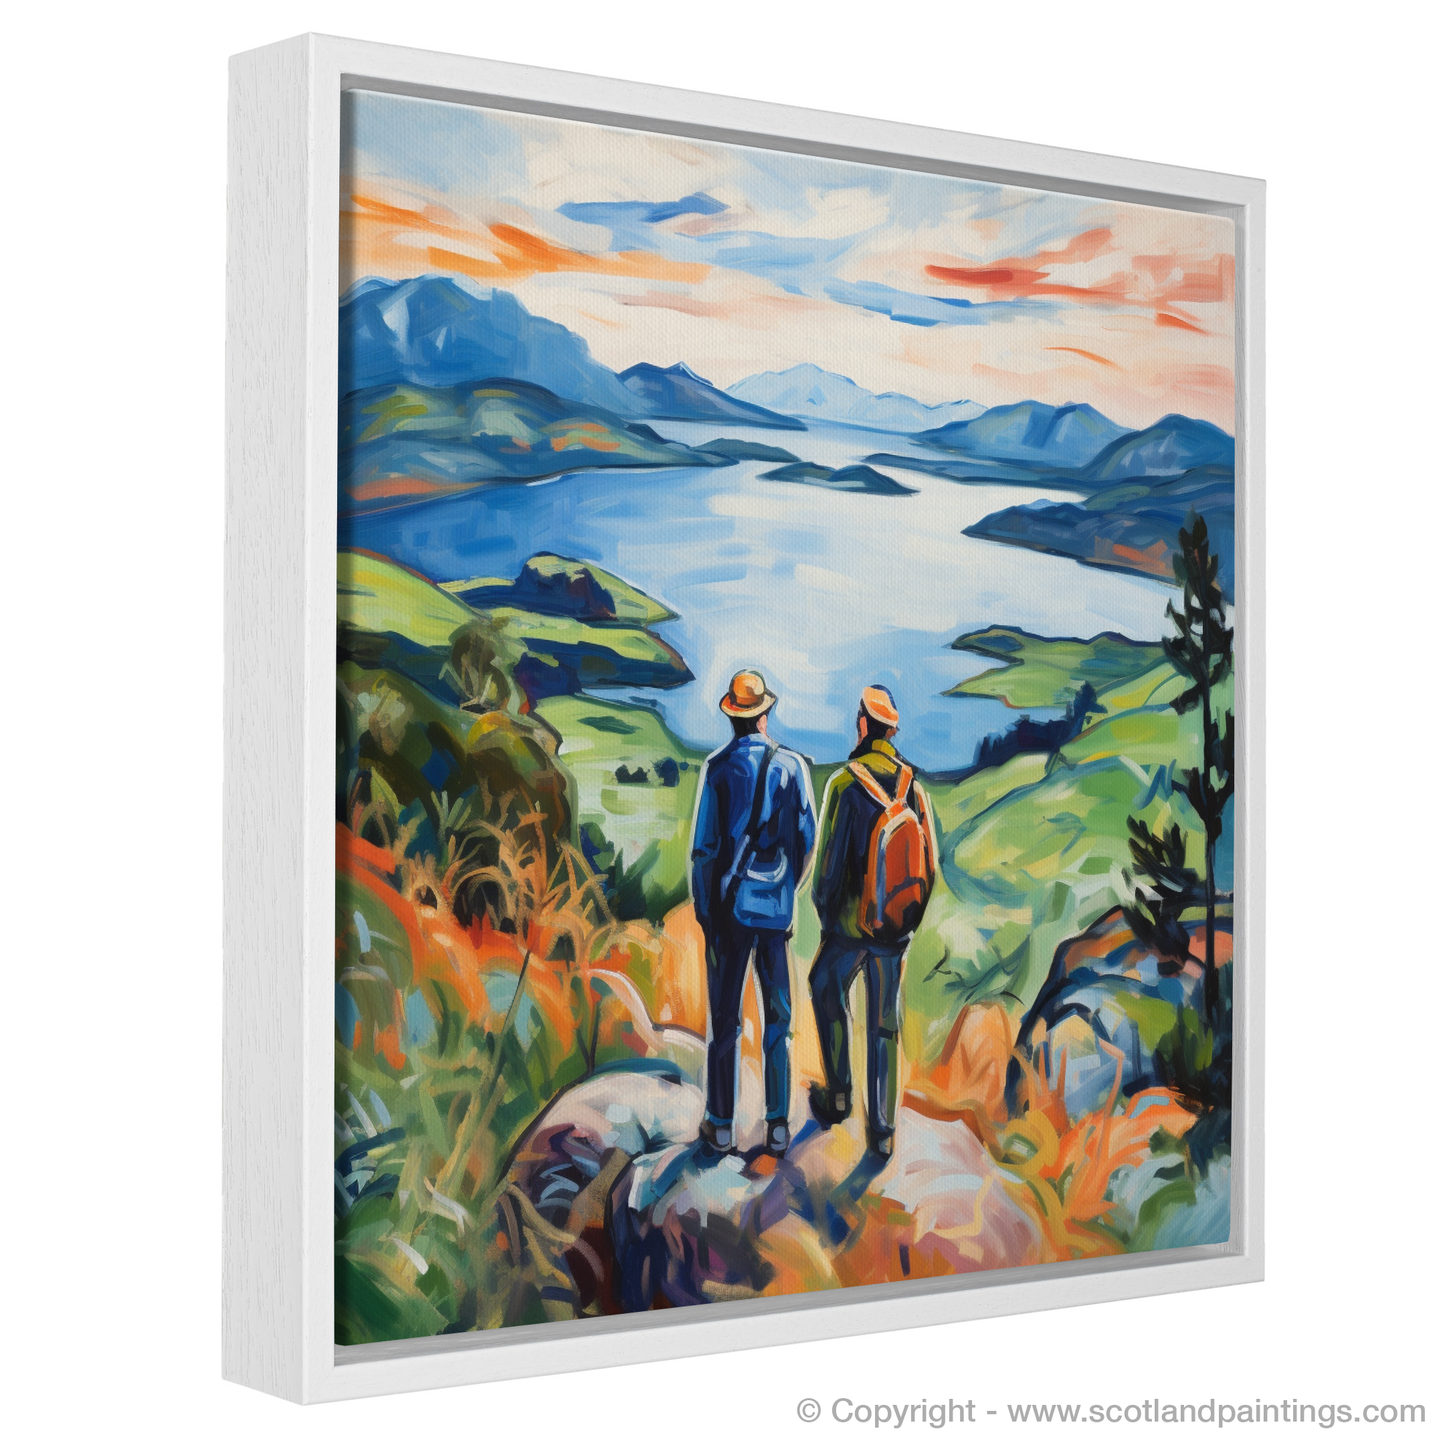 Painting and Art Print of Two hikers looking out on Loch Lomond entitled "Loch Lomond Reverie: A Fauvist Interpretation".